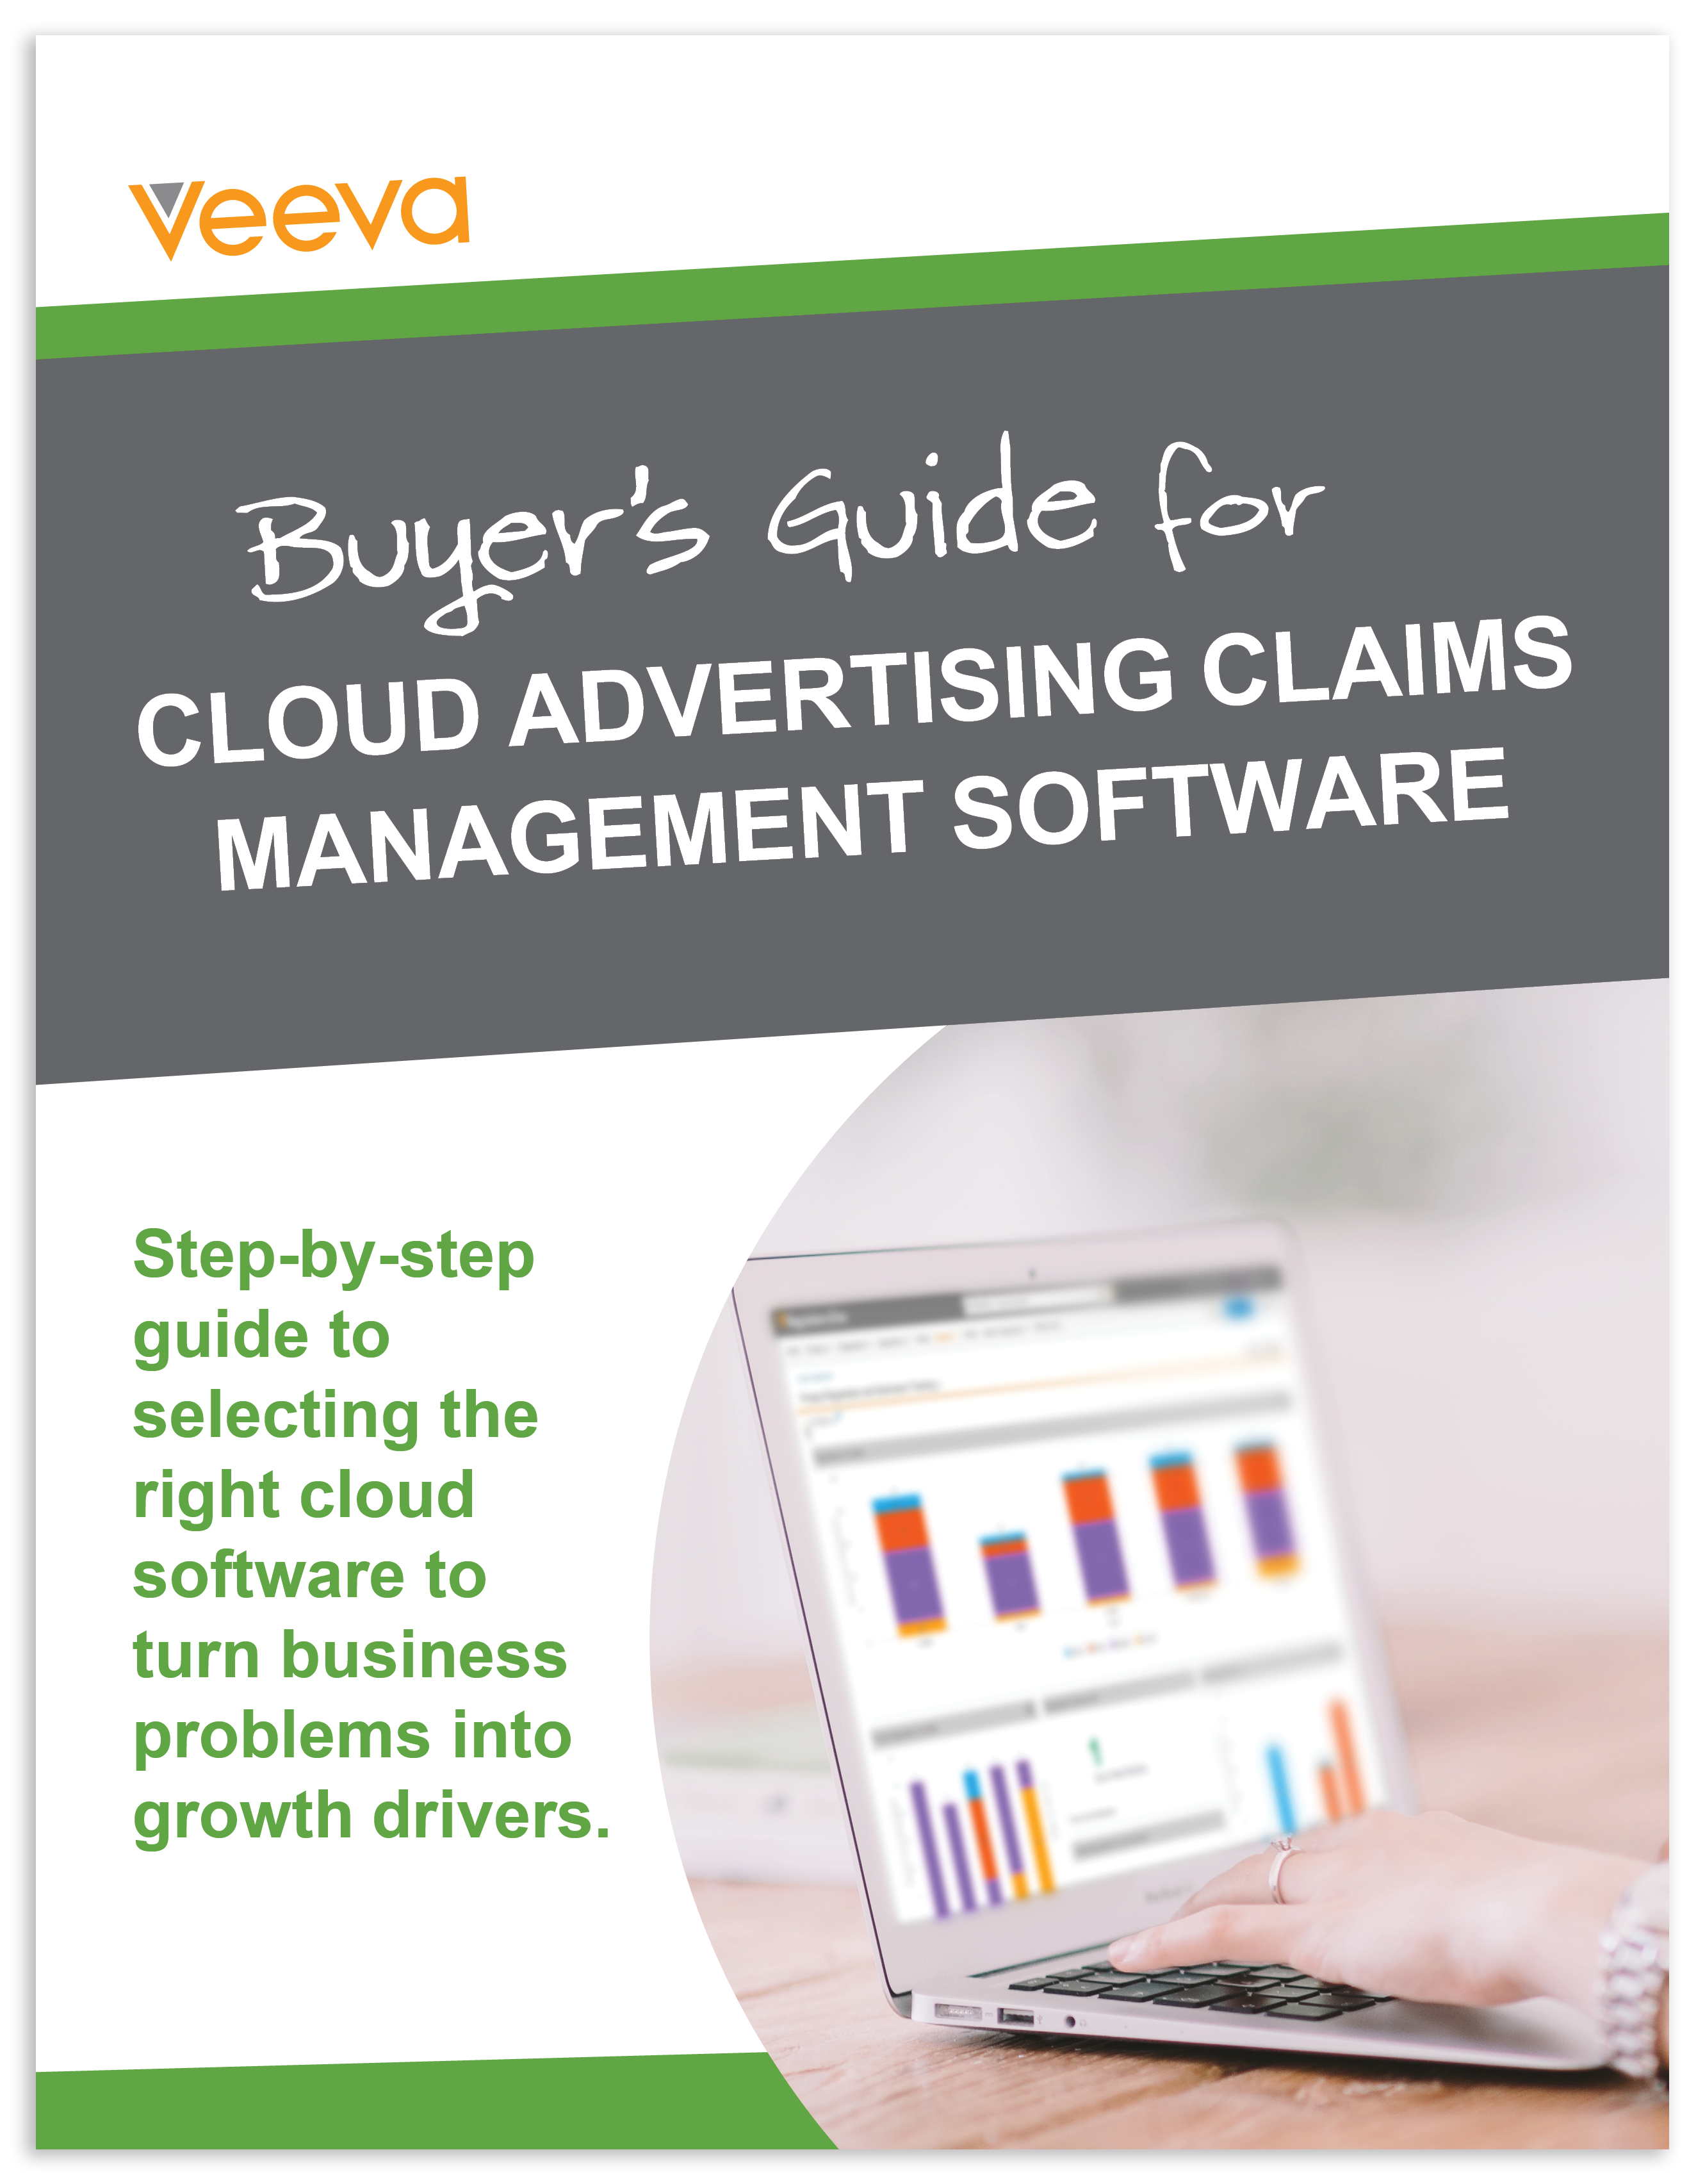 Buyer's Guide for Cloud Advertising Claims Management Software eBook